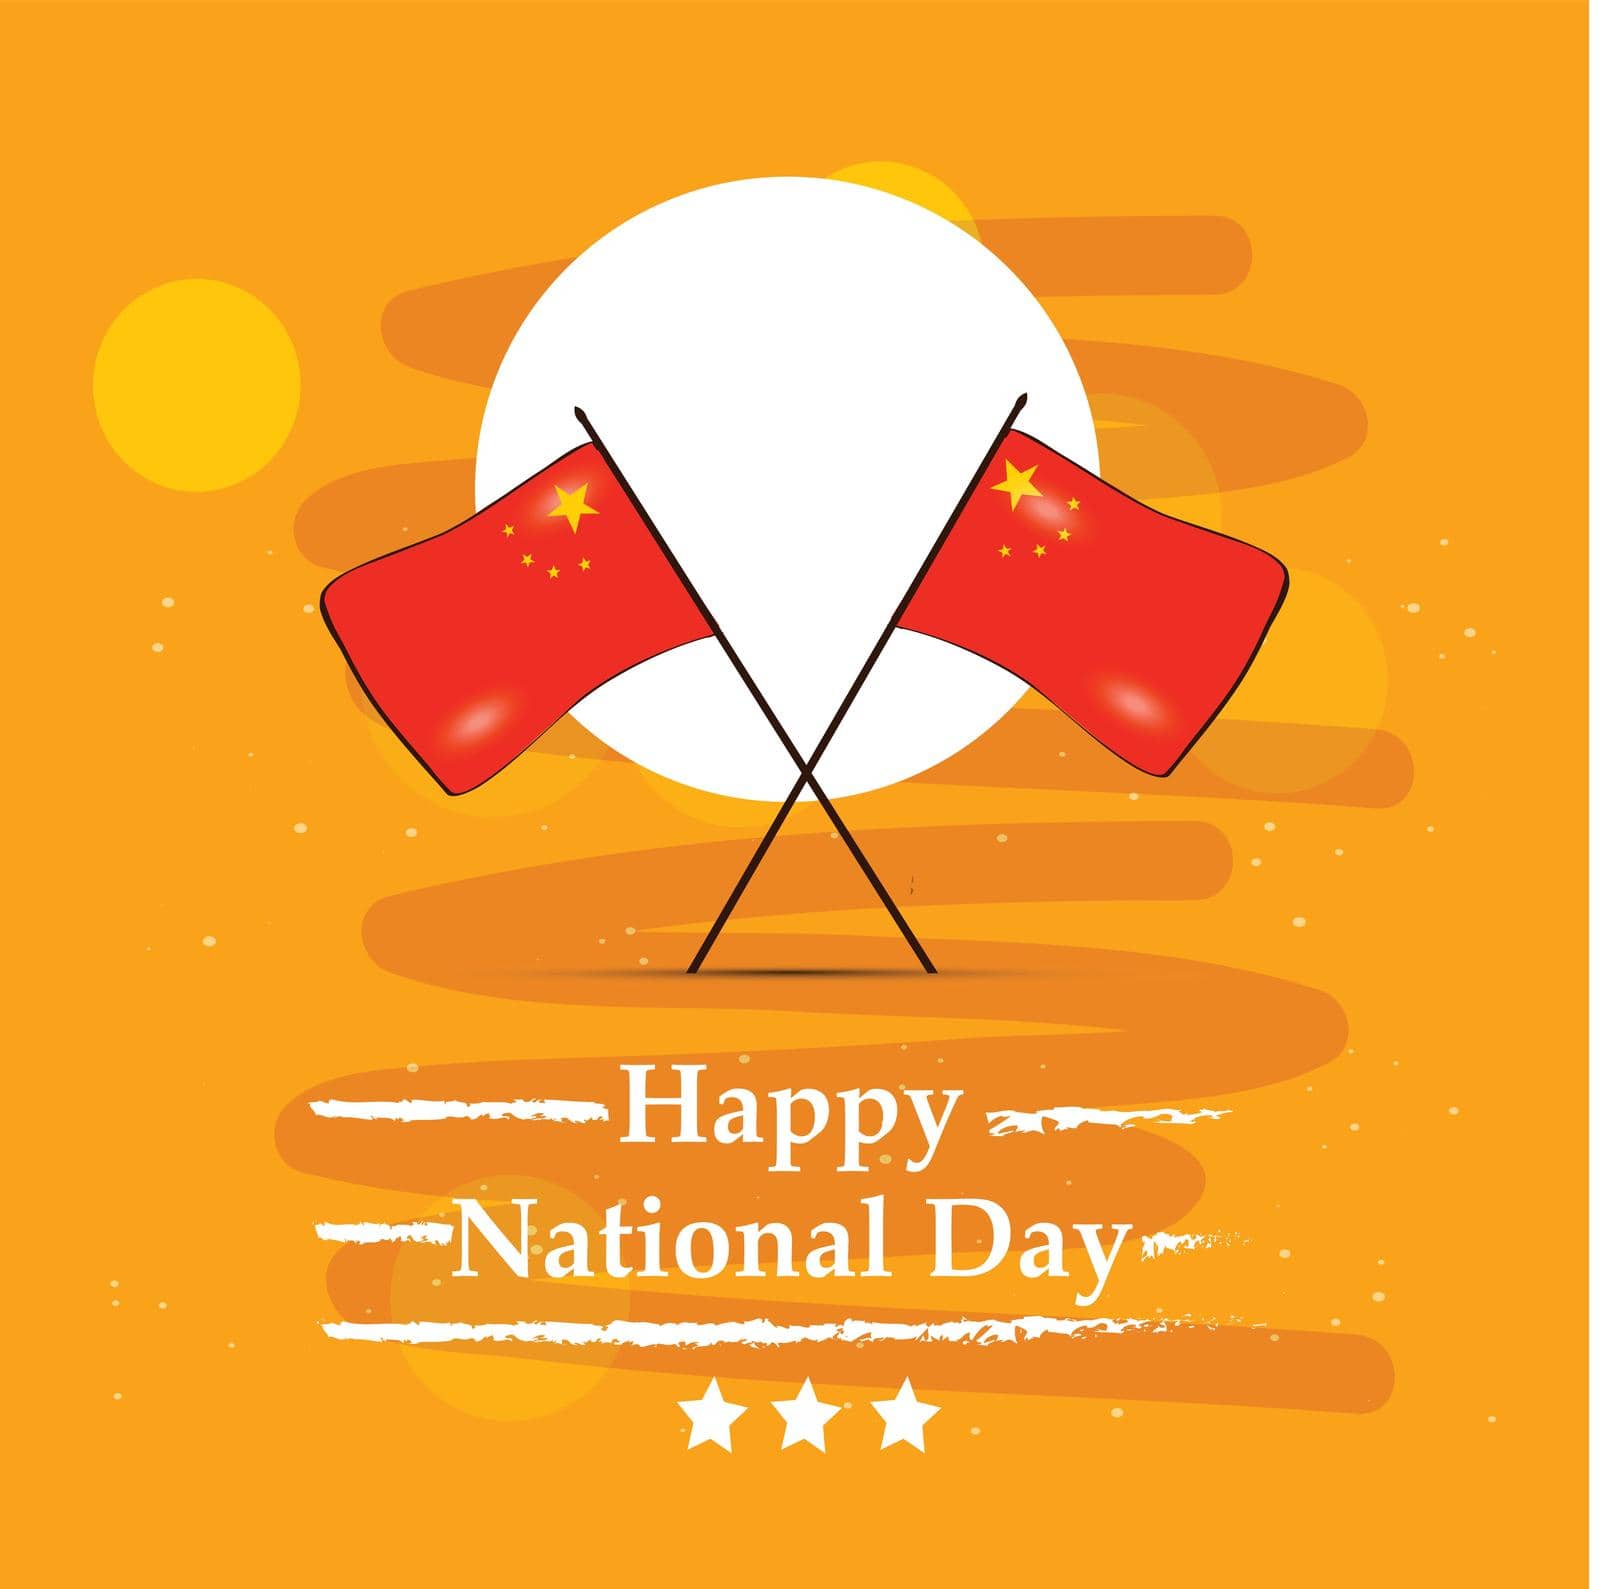 China National Day Background by vectorworld